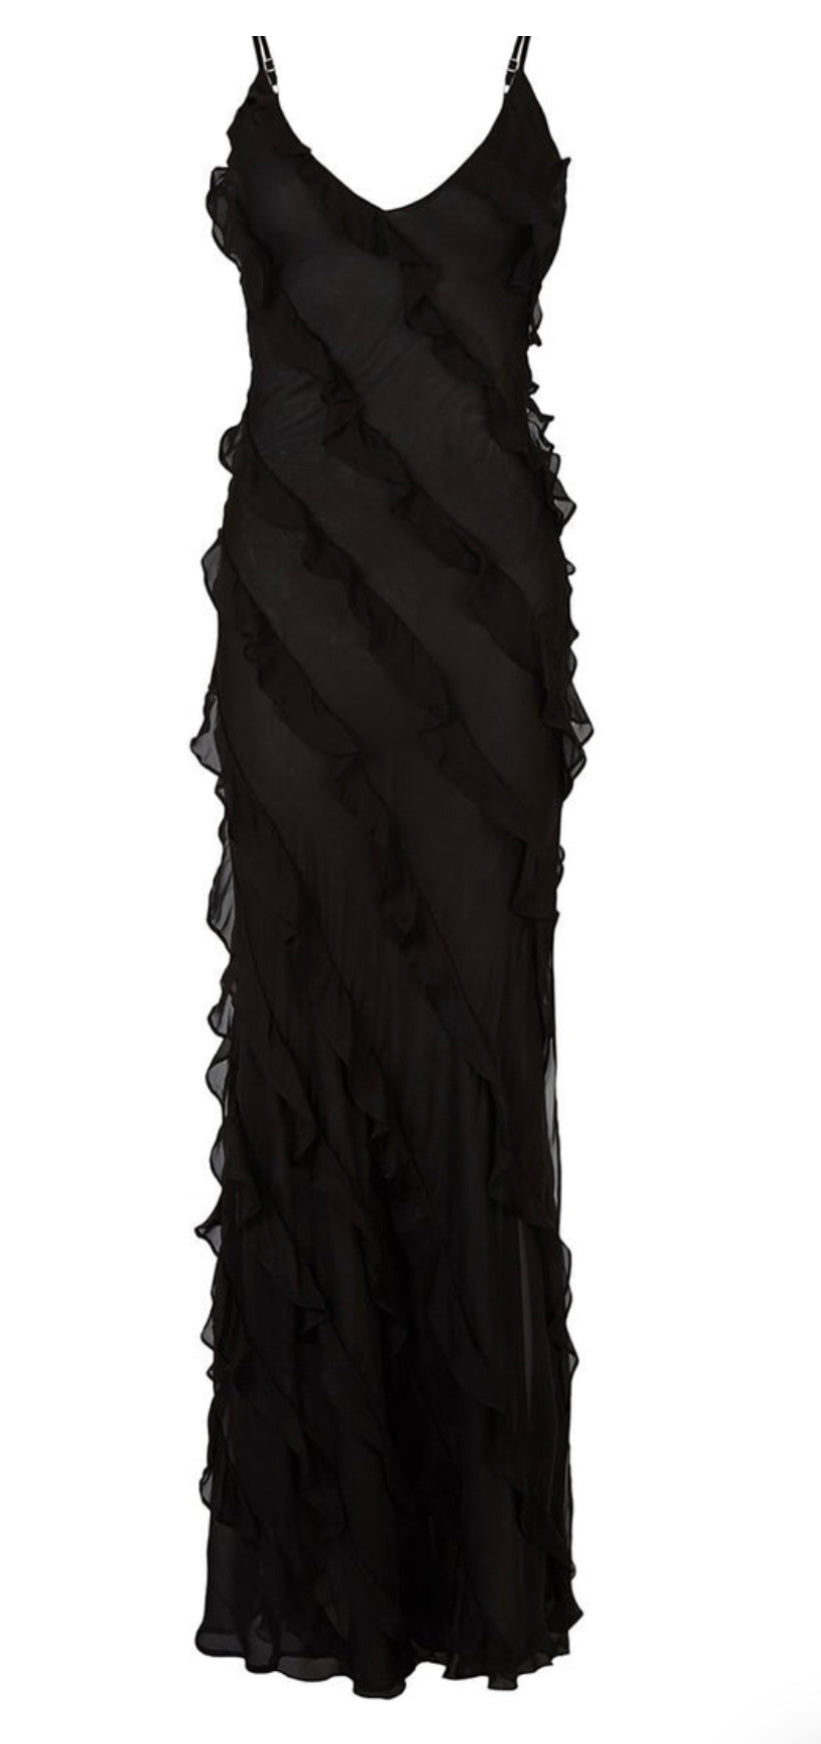 Rat & Boa Selena ball dress in black silk chiffon front view with white background. 